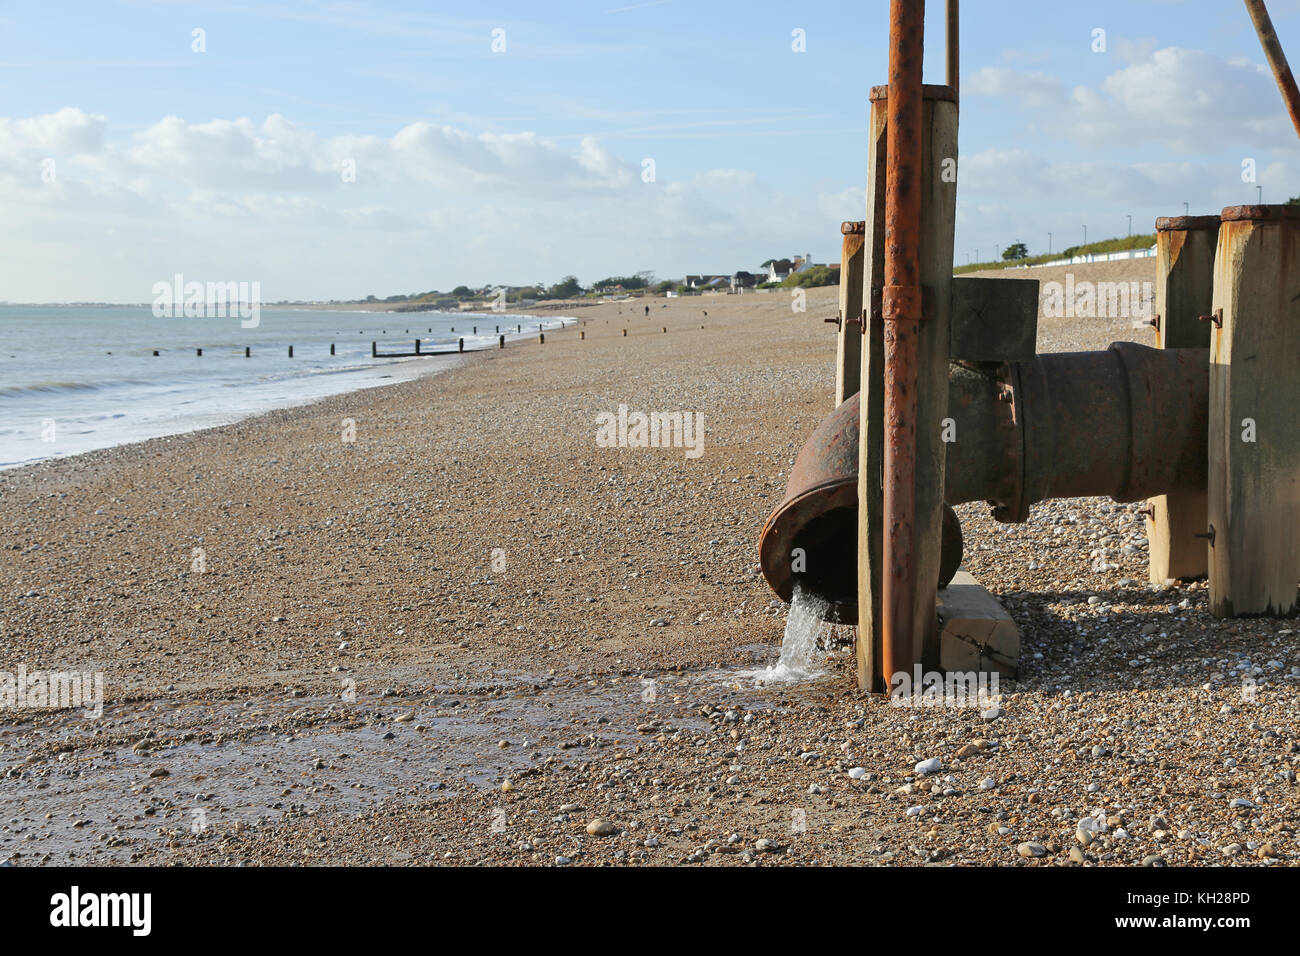 A storm water overflow pipe discharges water onto the public beach at Bognor Regis in Sussex, UK Stock Photo